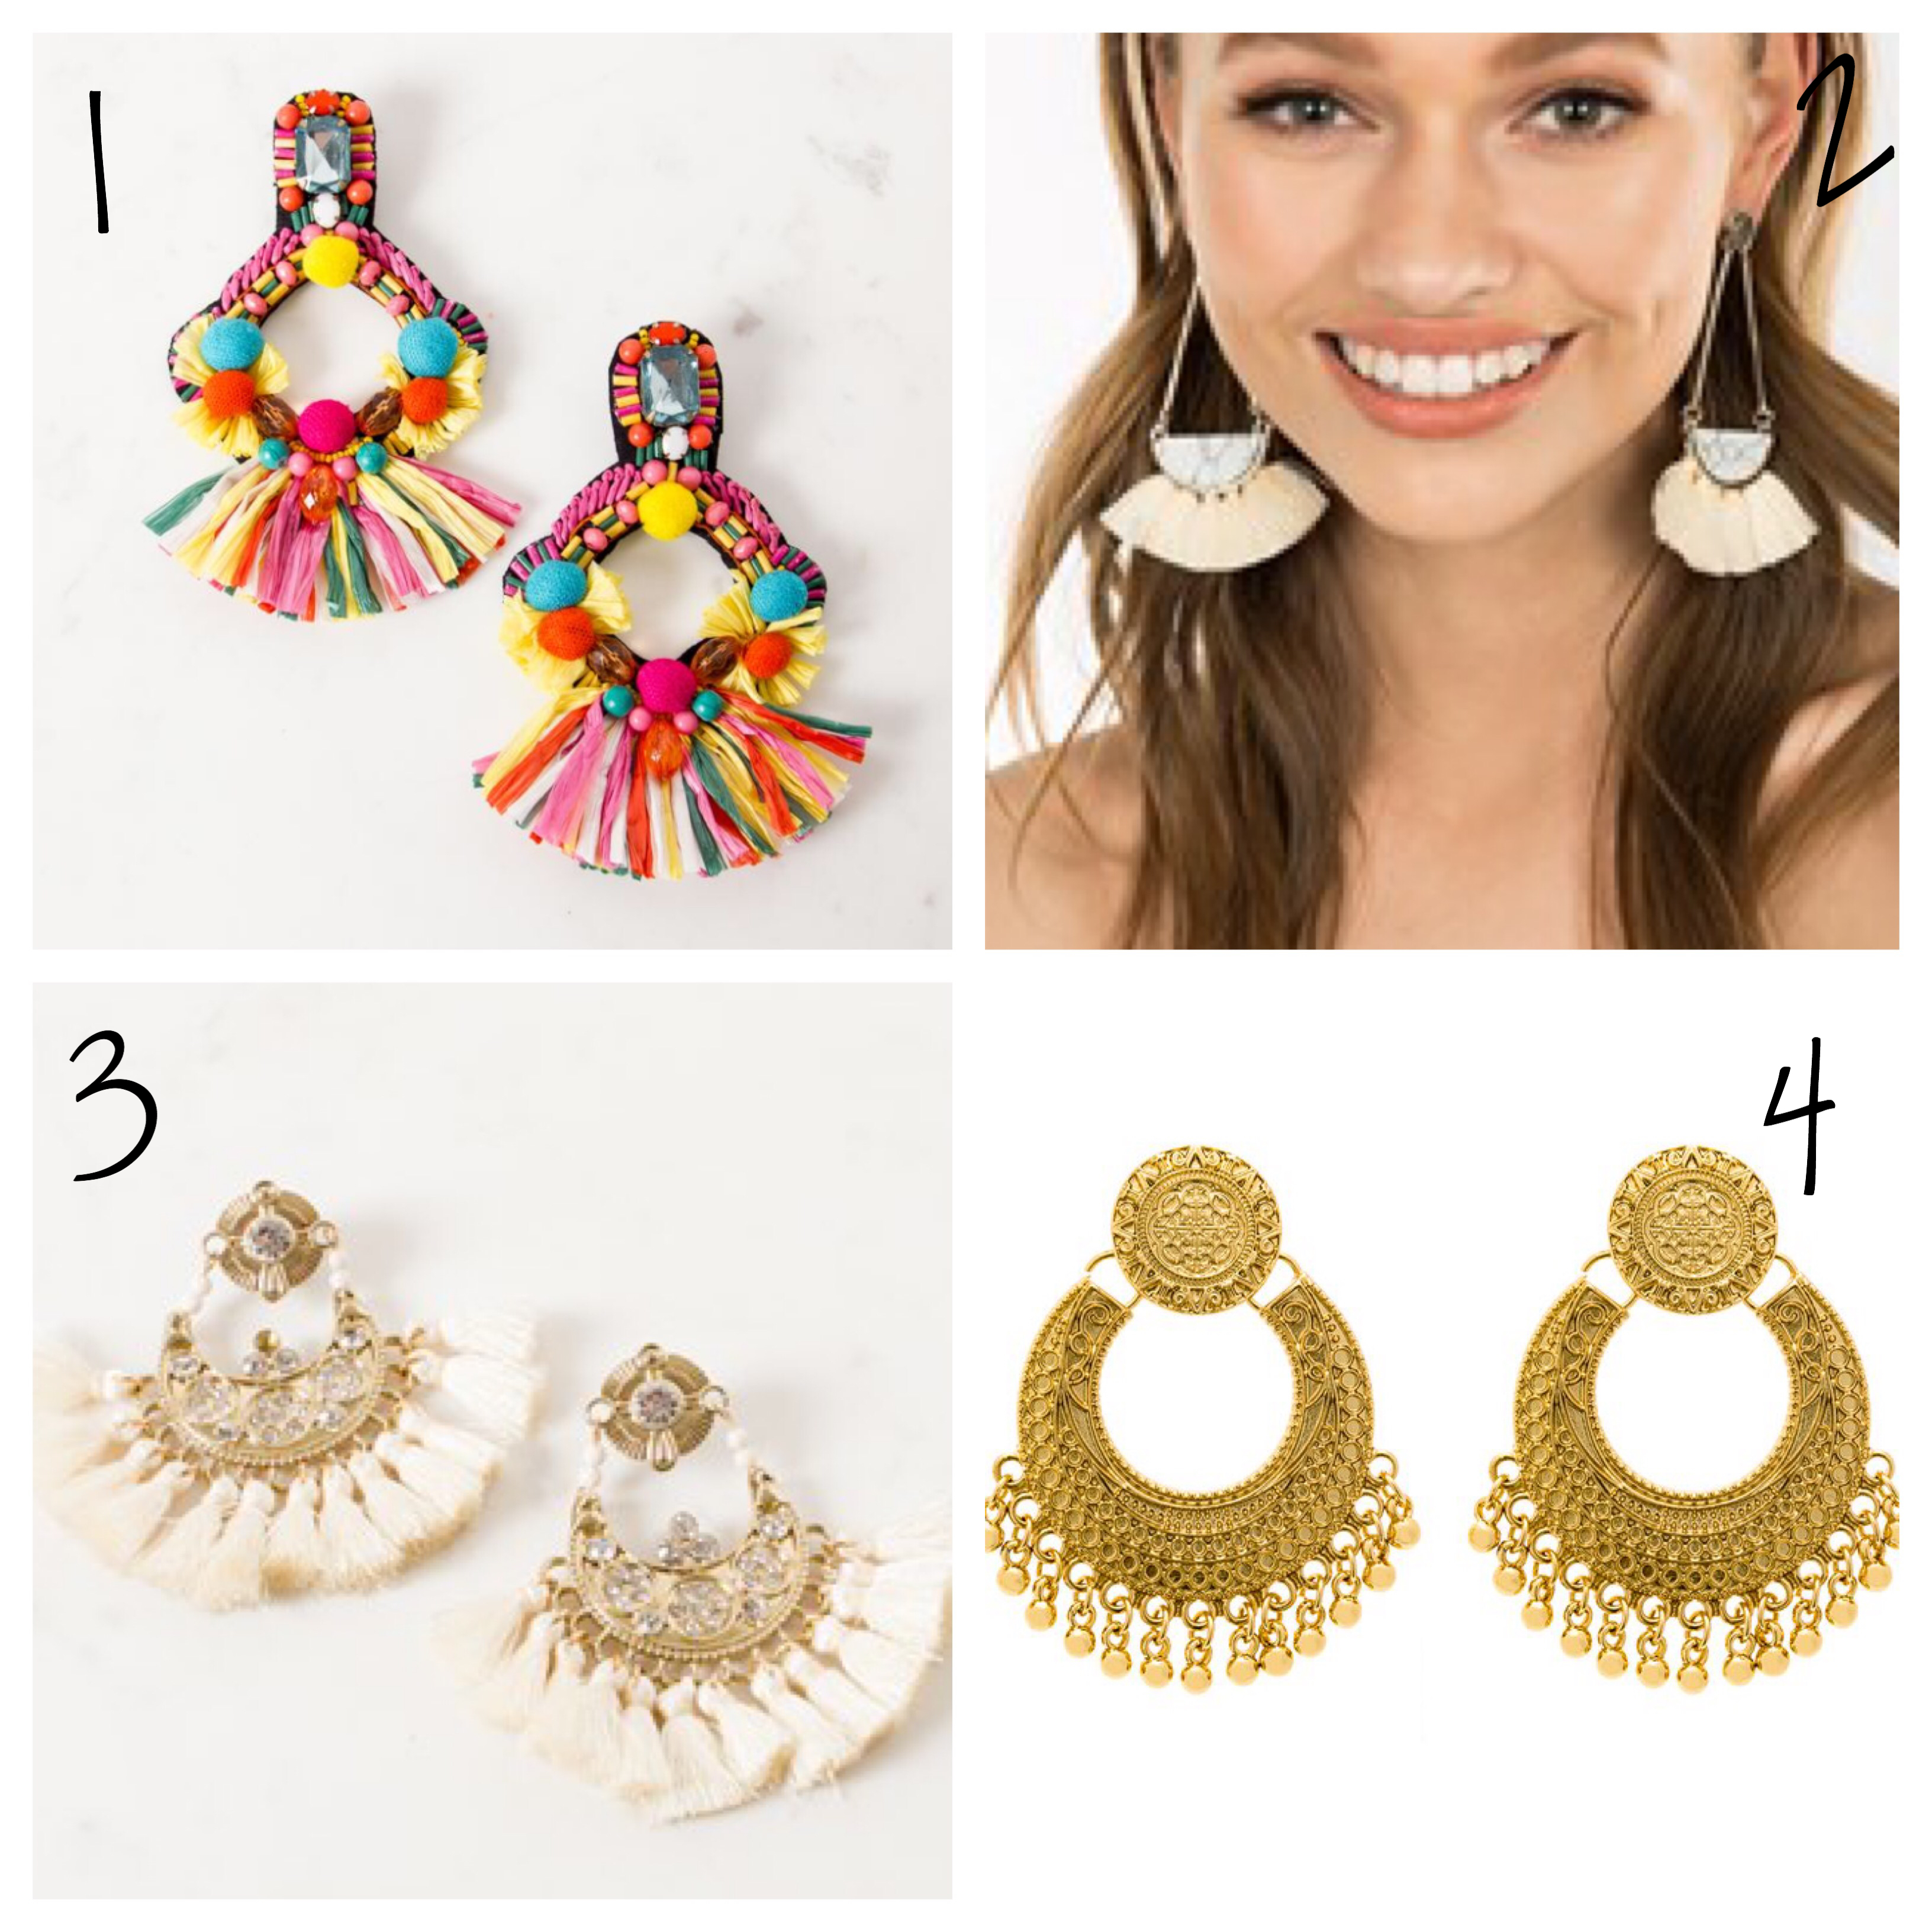 24 Statement Earrings Under $50 | Trend Tuesday - Pretty Chuffed